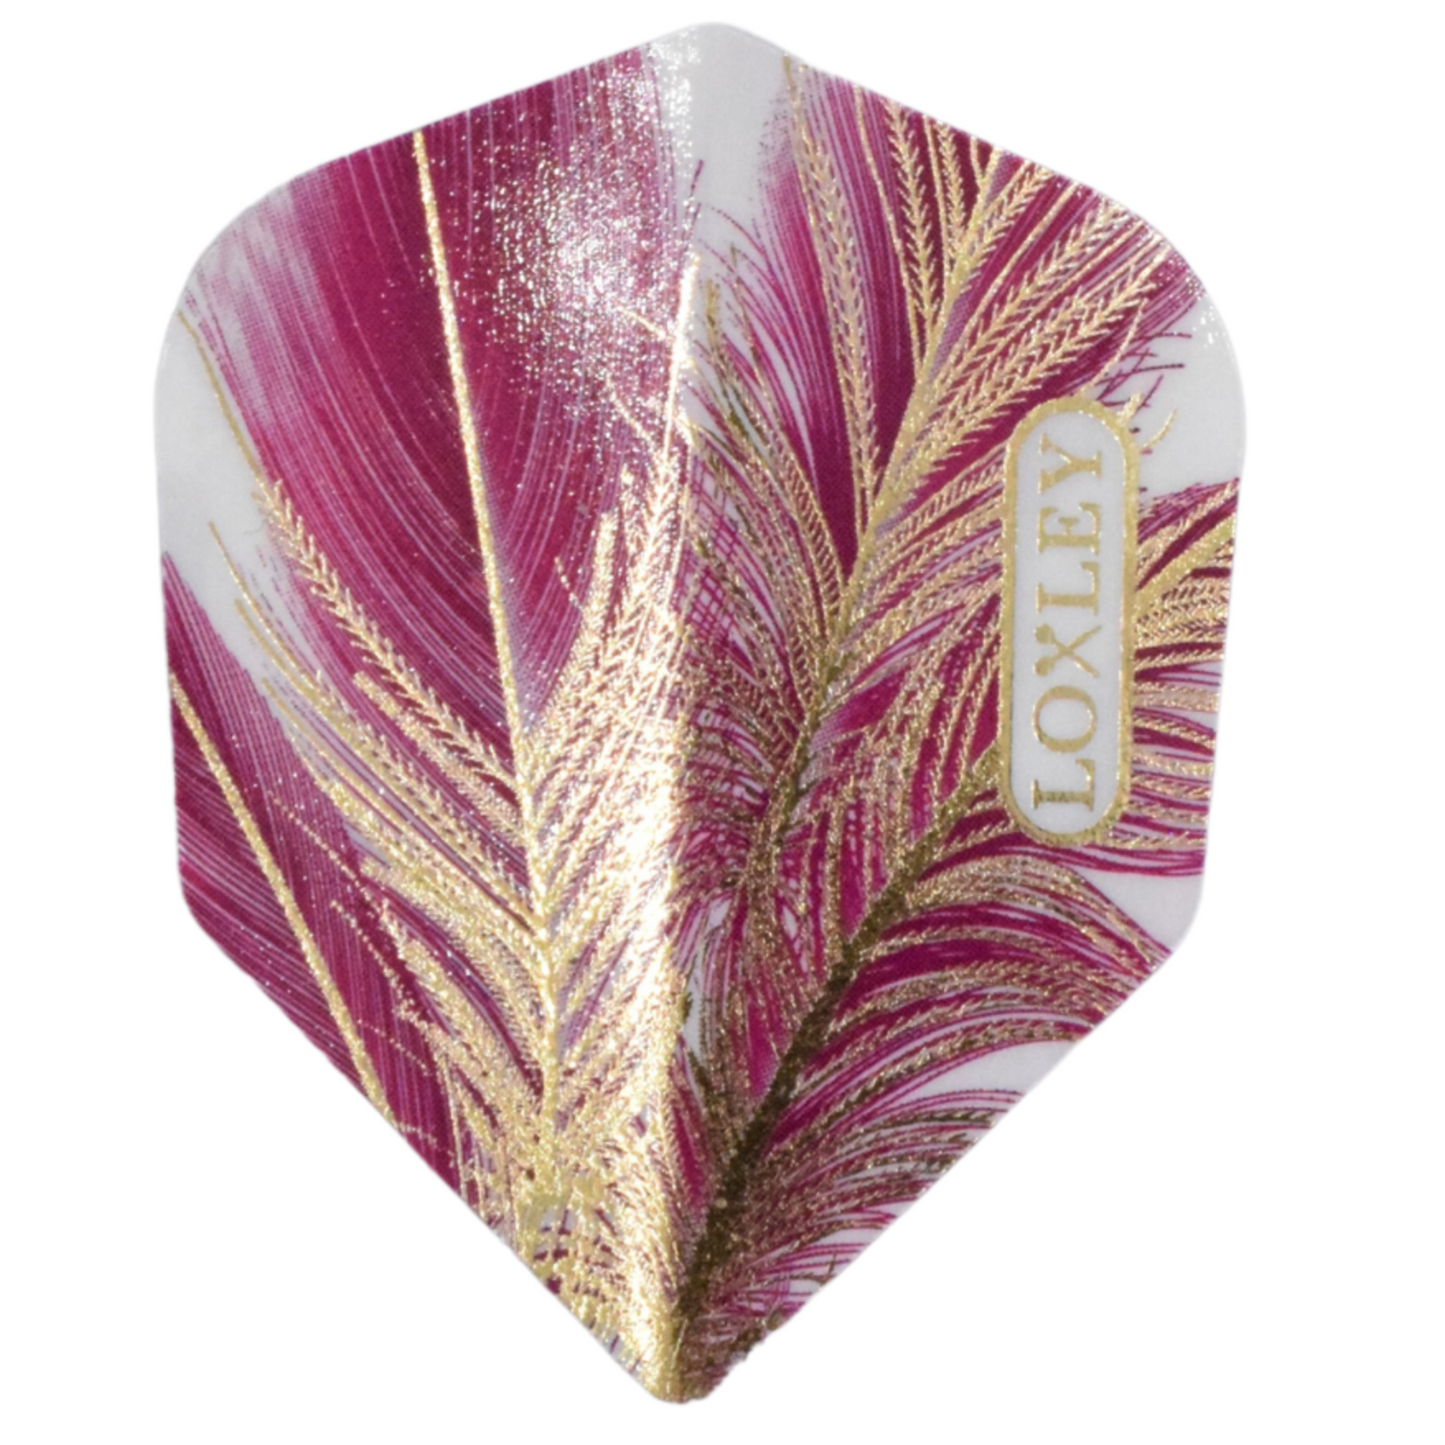 Loxley - Flights - Purple Gold Feather - 10 sets